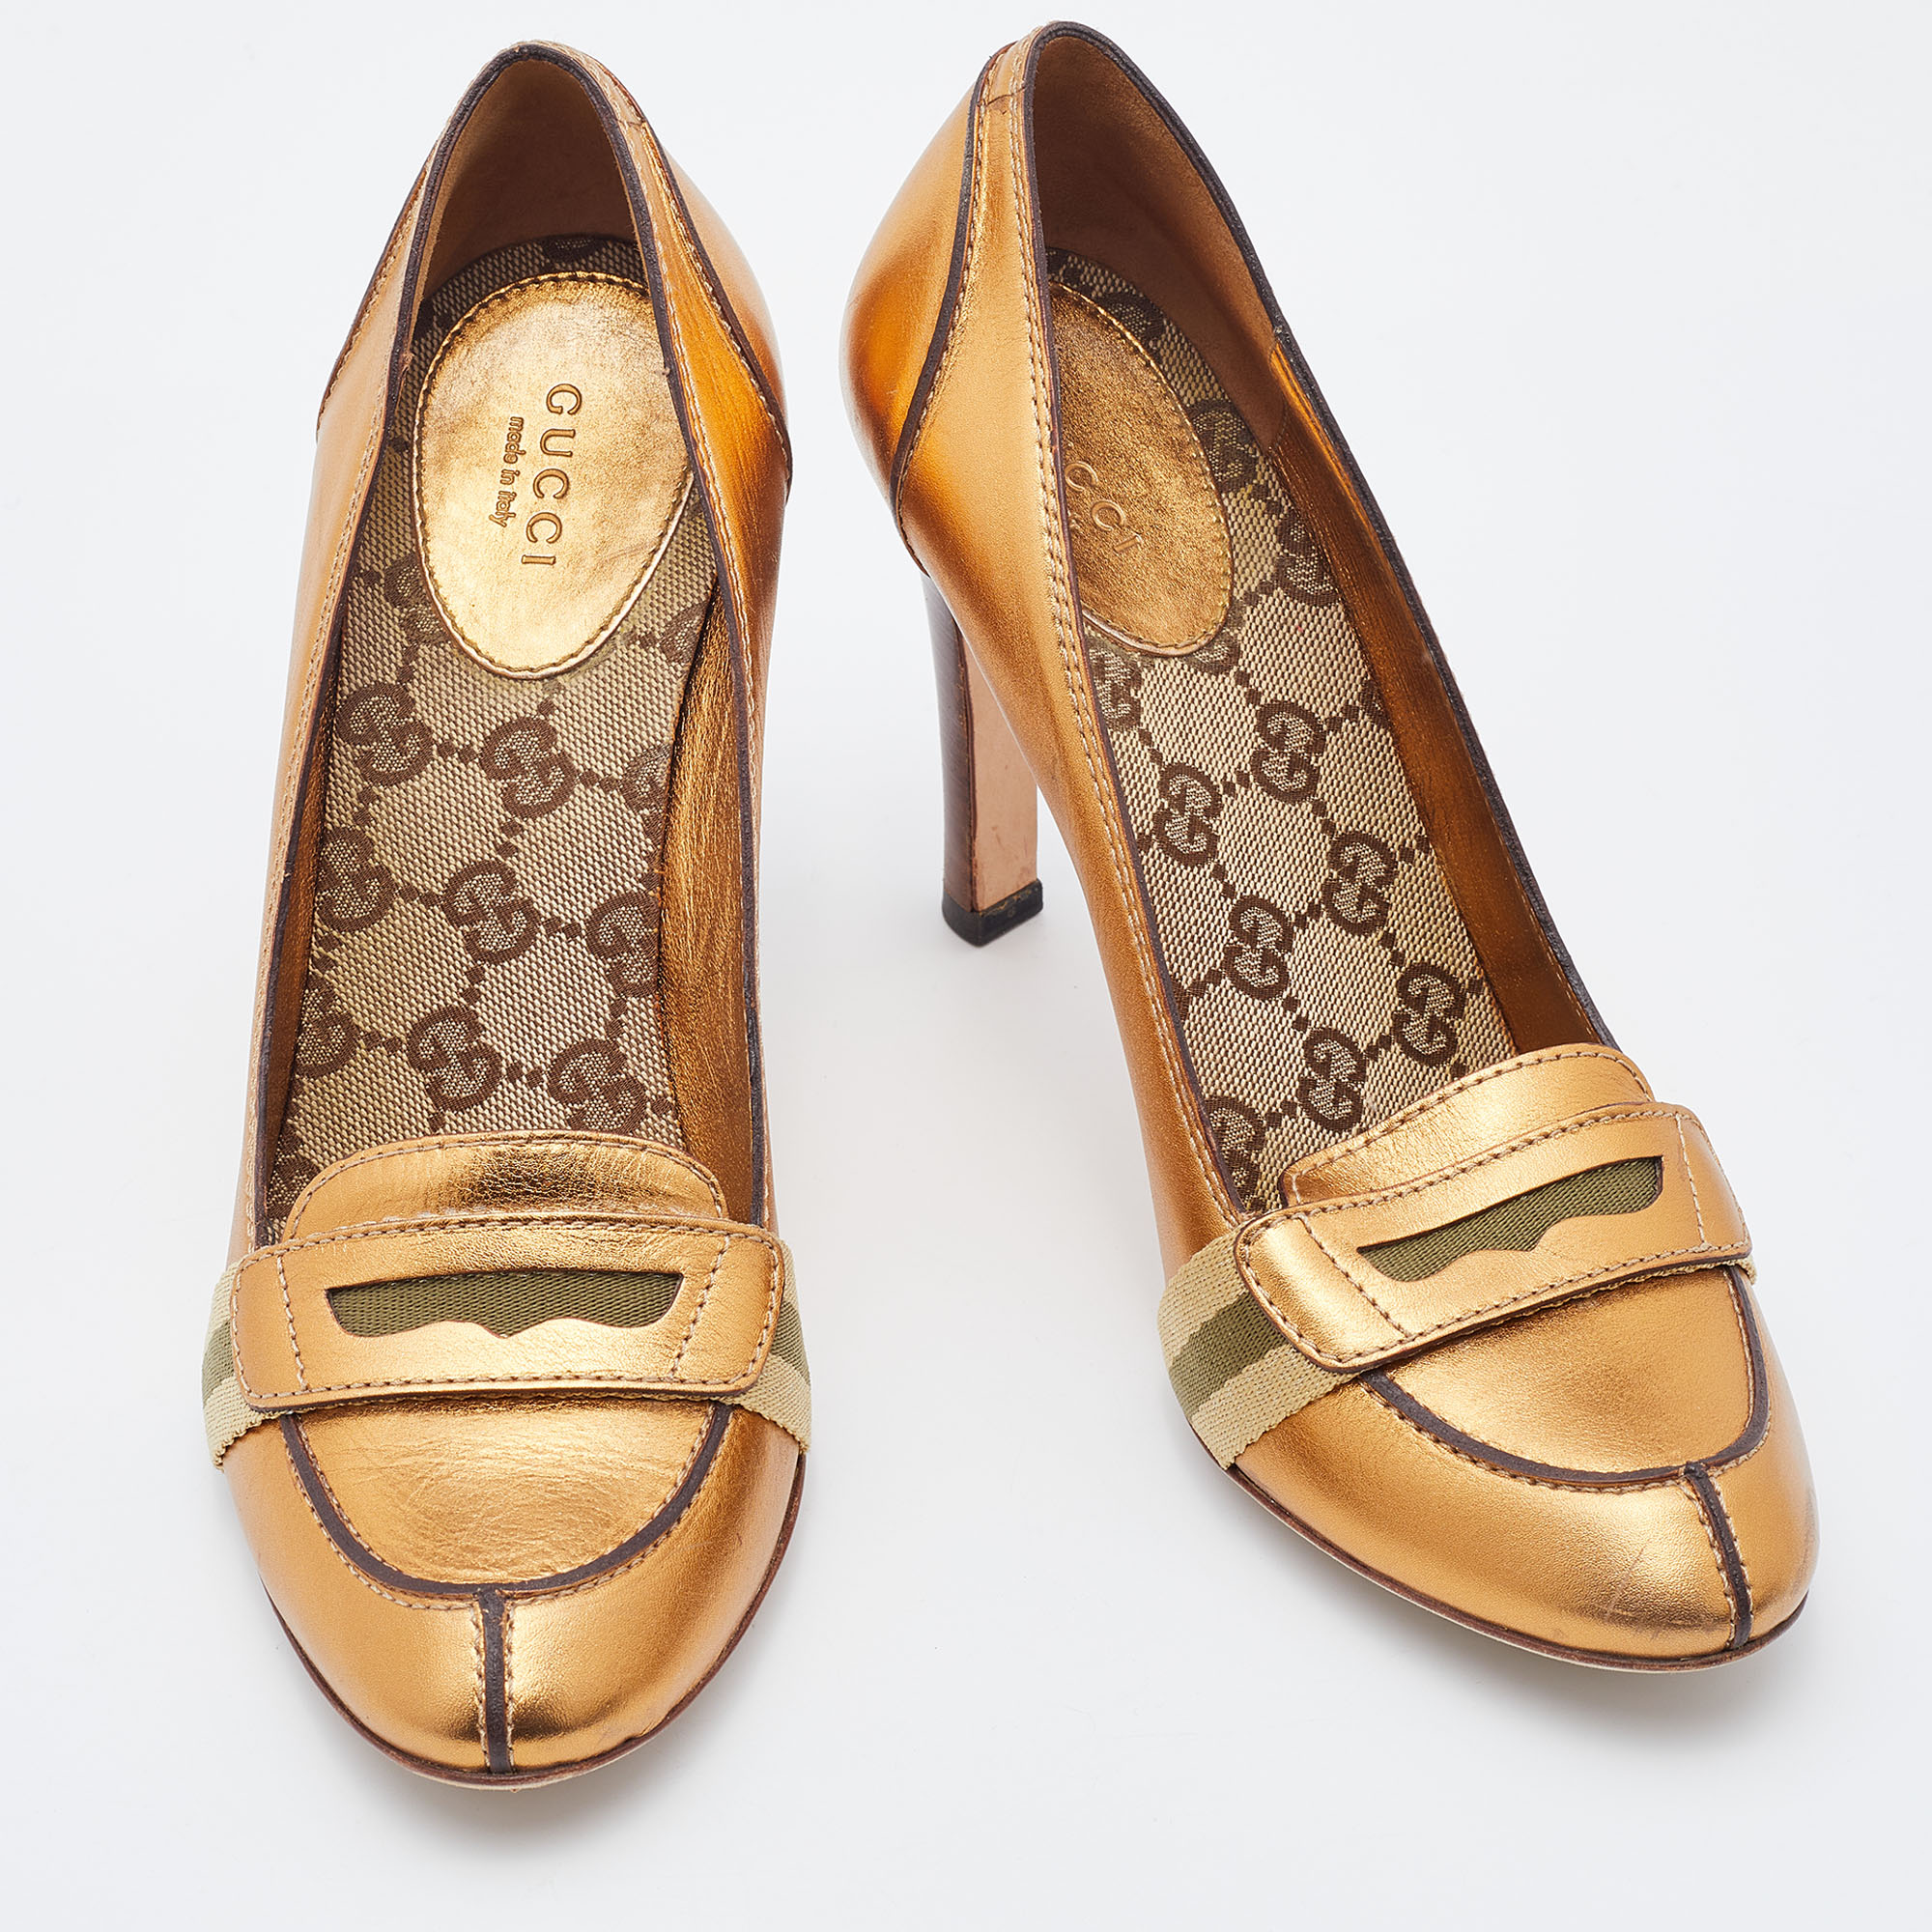 Gucci Metallic Gold Leather Lifford Penny Loafer Pumps Size 37.5